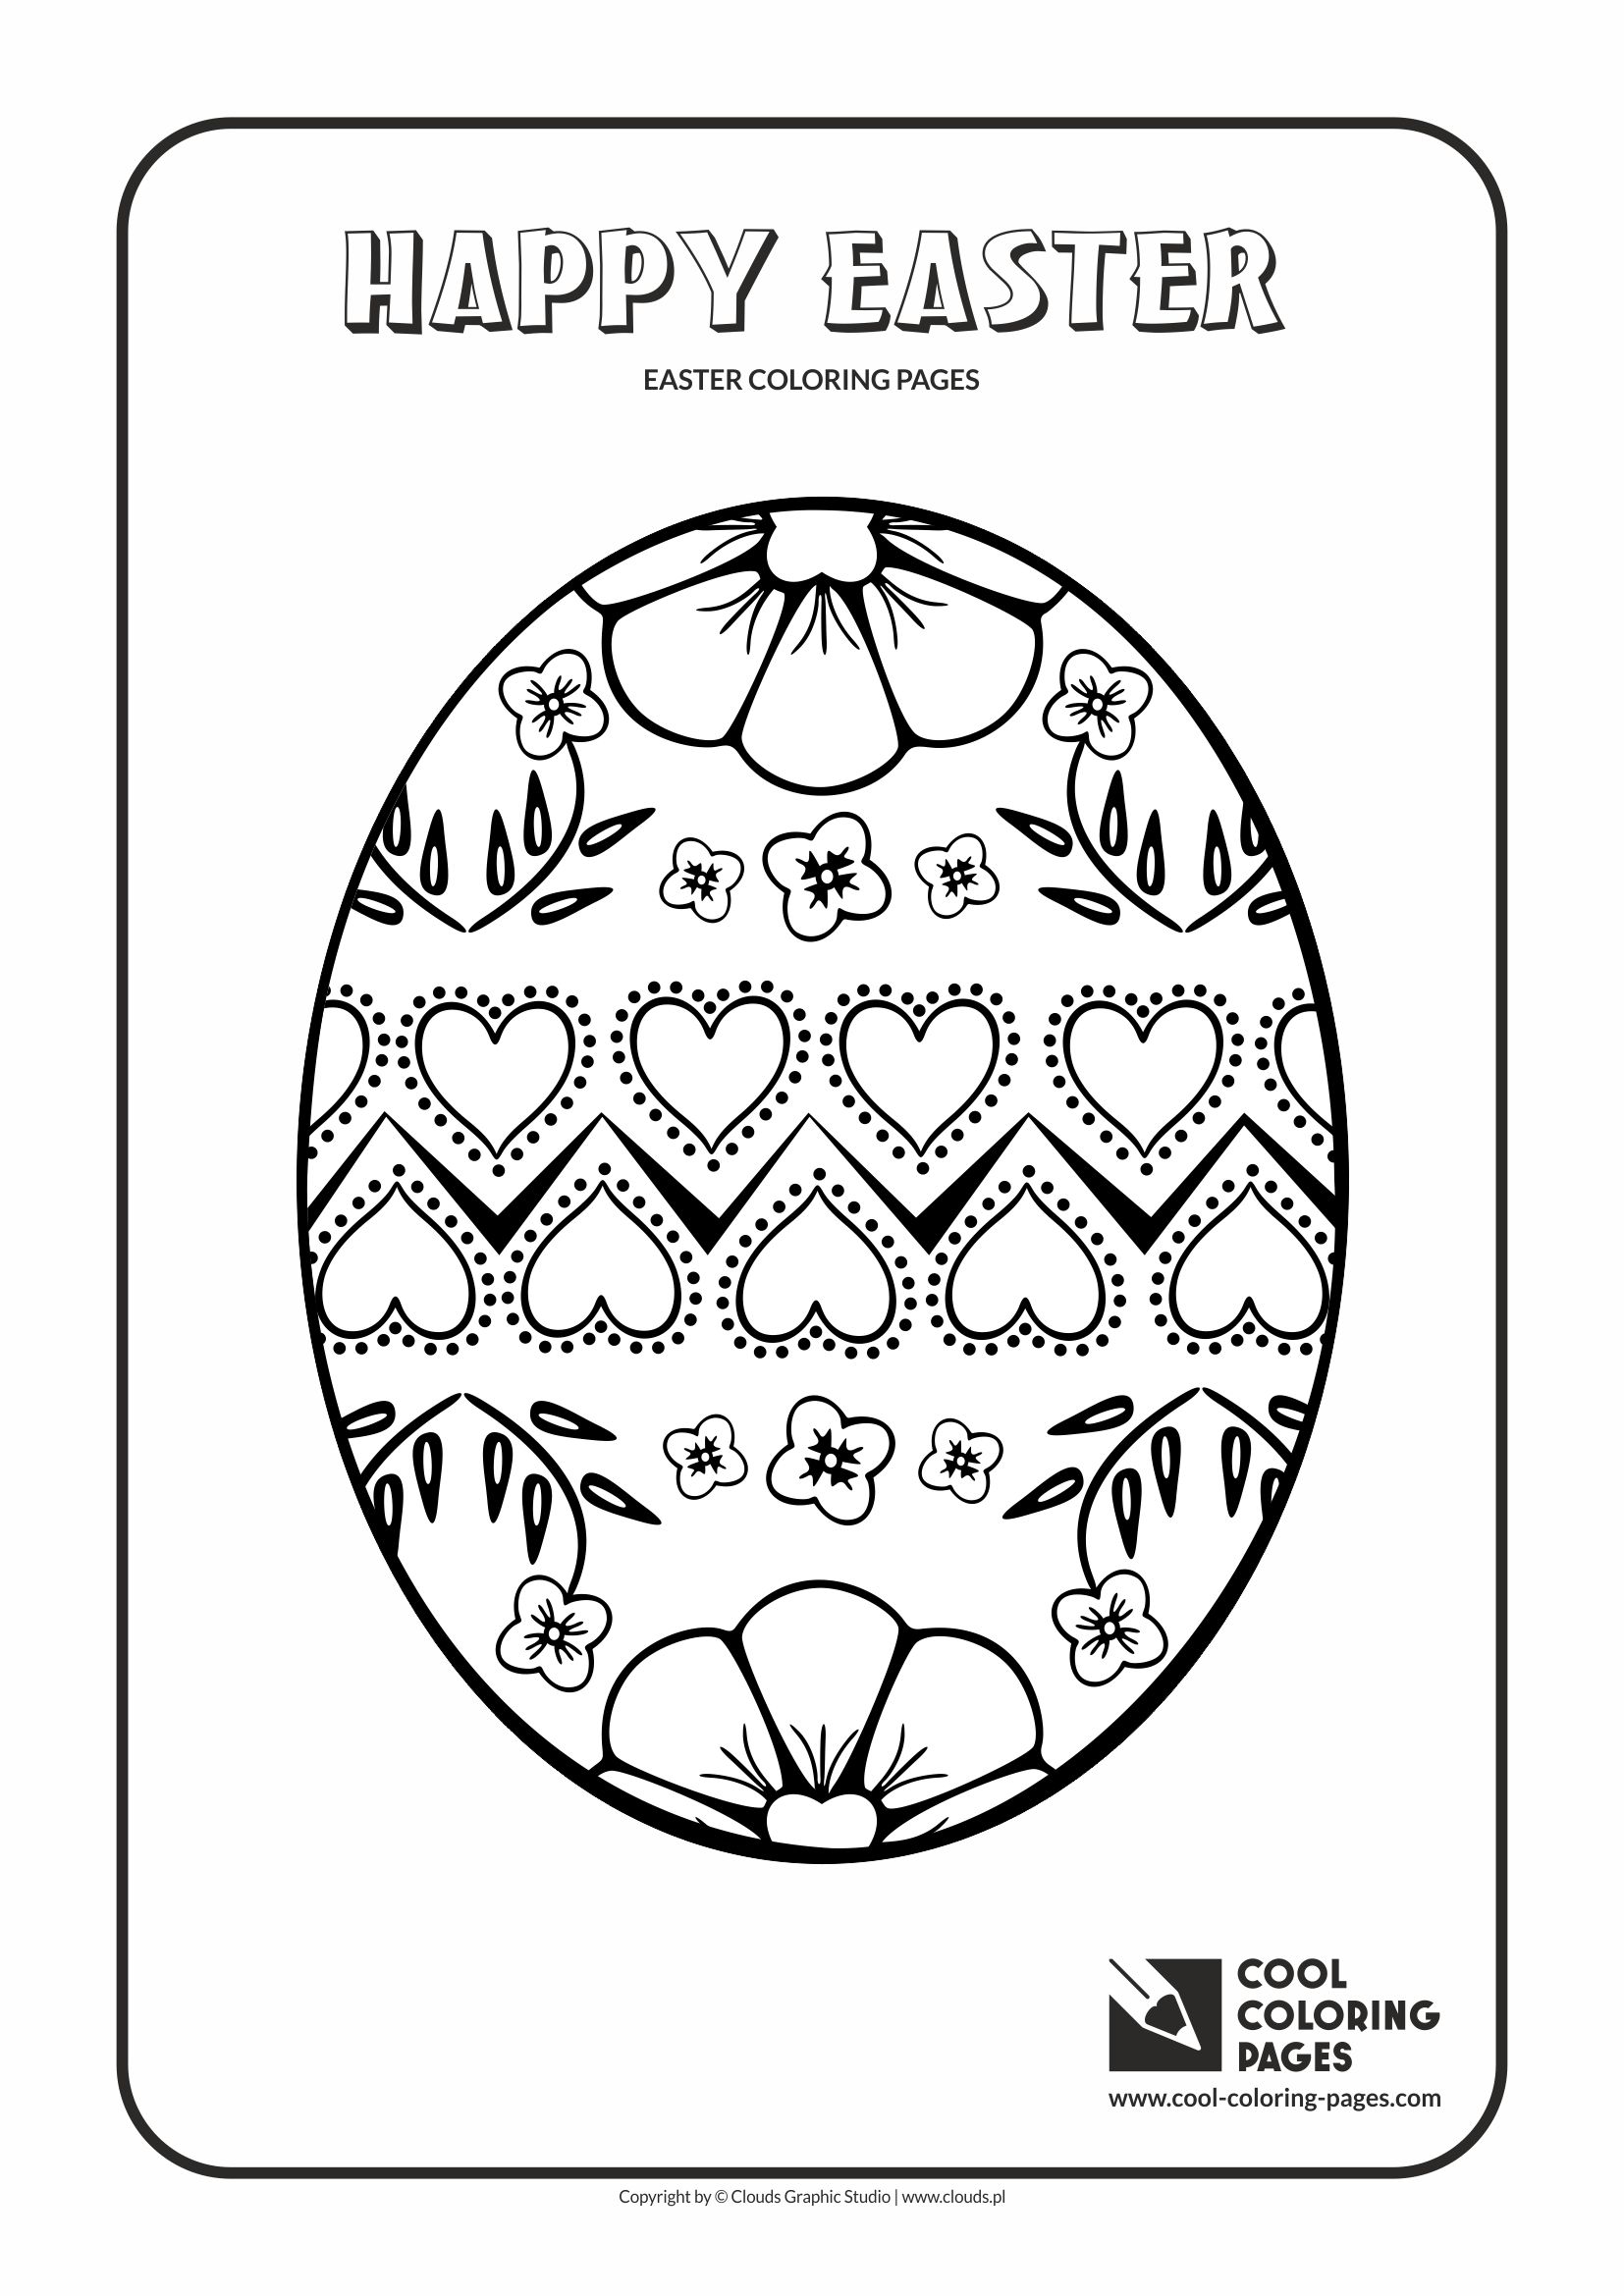 Cool Coloring Pages Easter egg no 4 coloring page Cool Coloring Pages